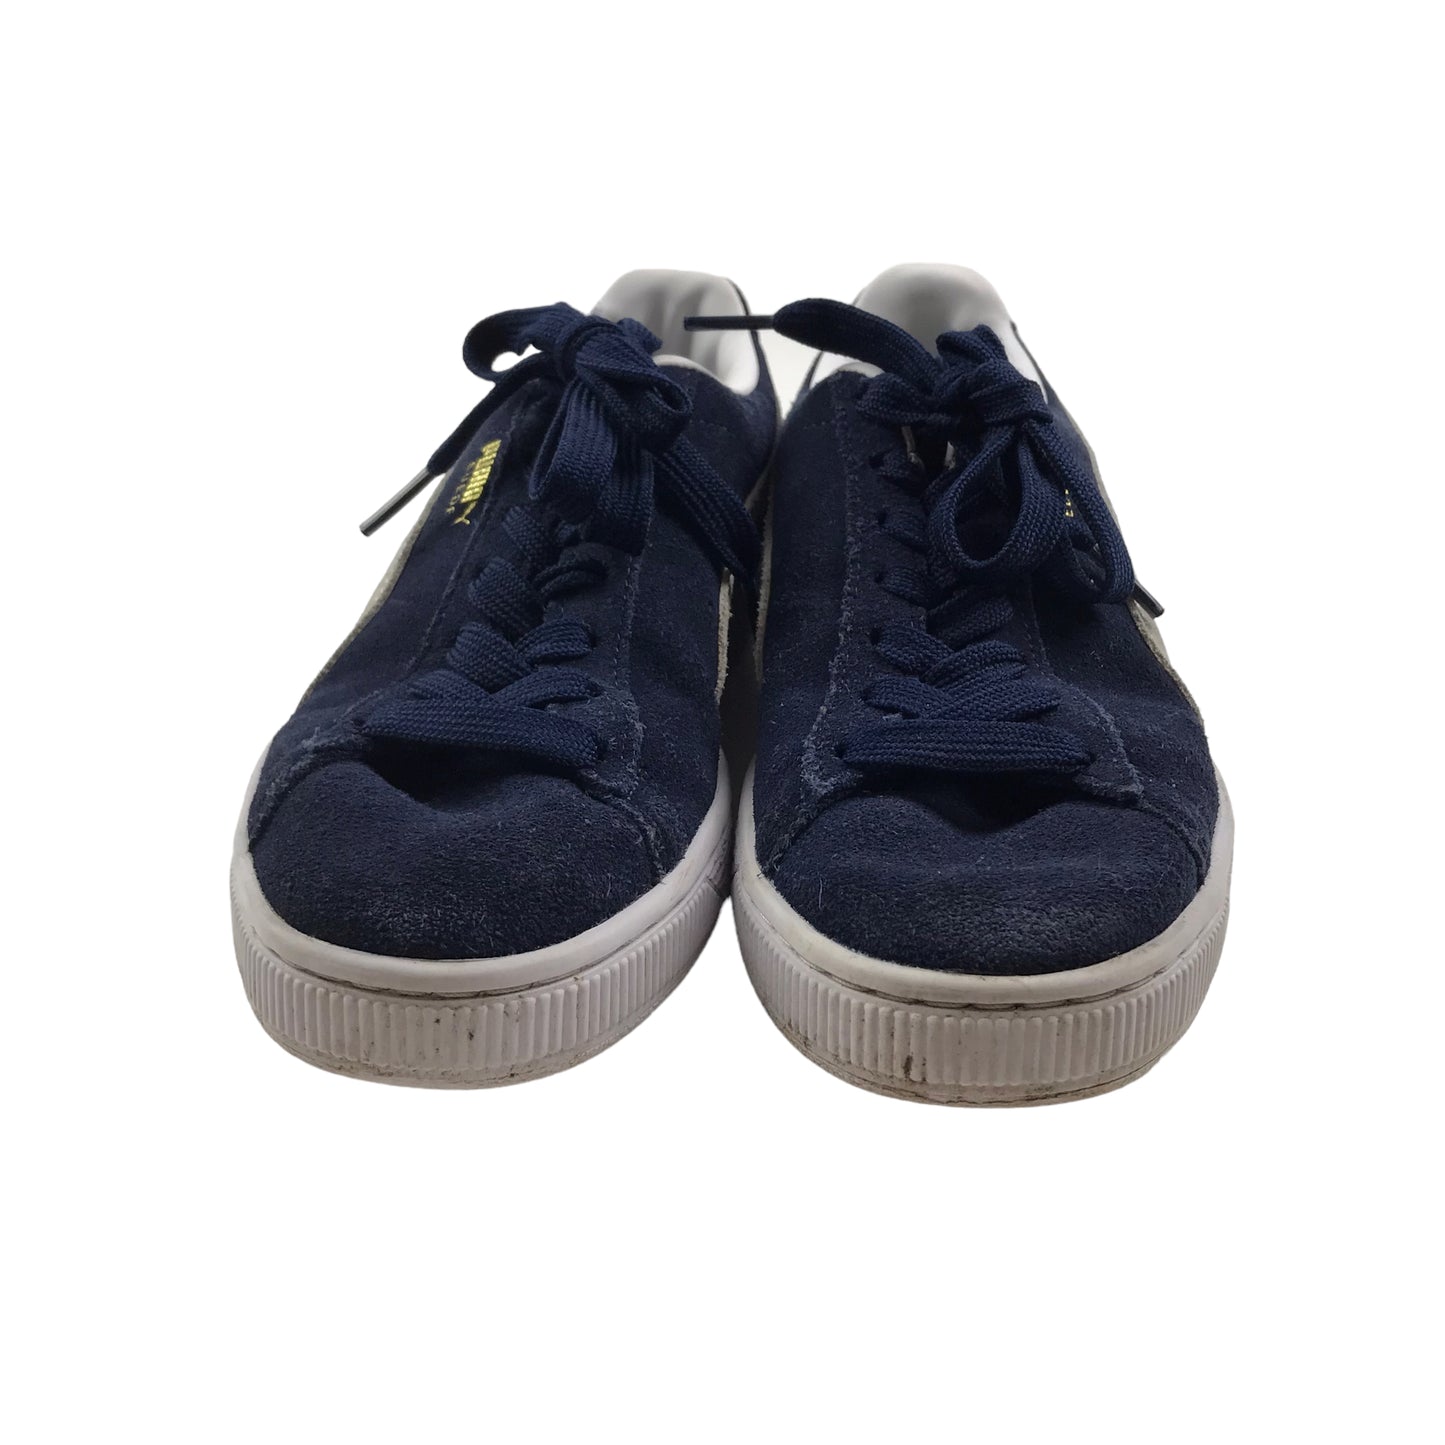 Puma Suede Navy Blue Trainers Shoe Size 5